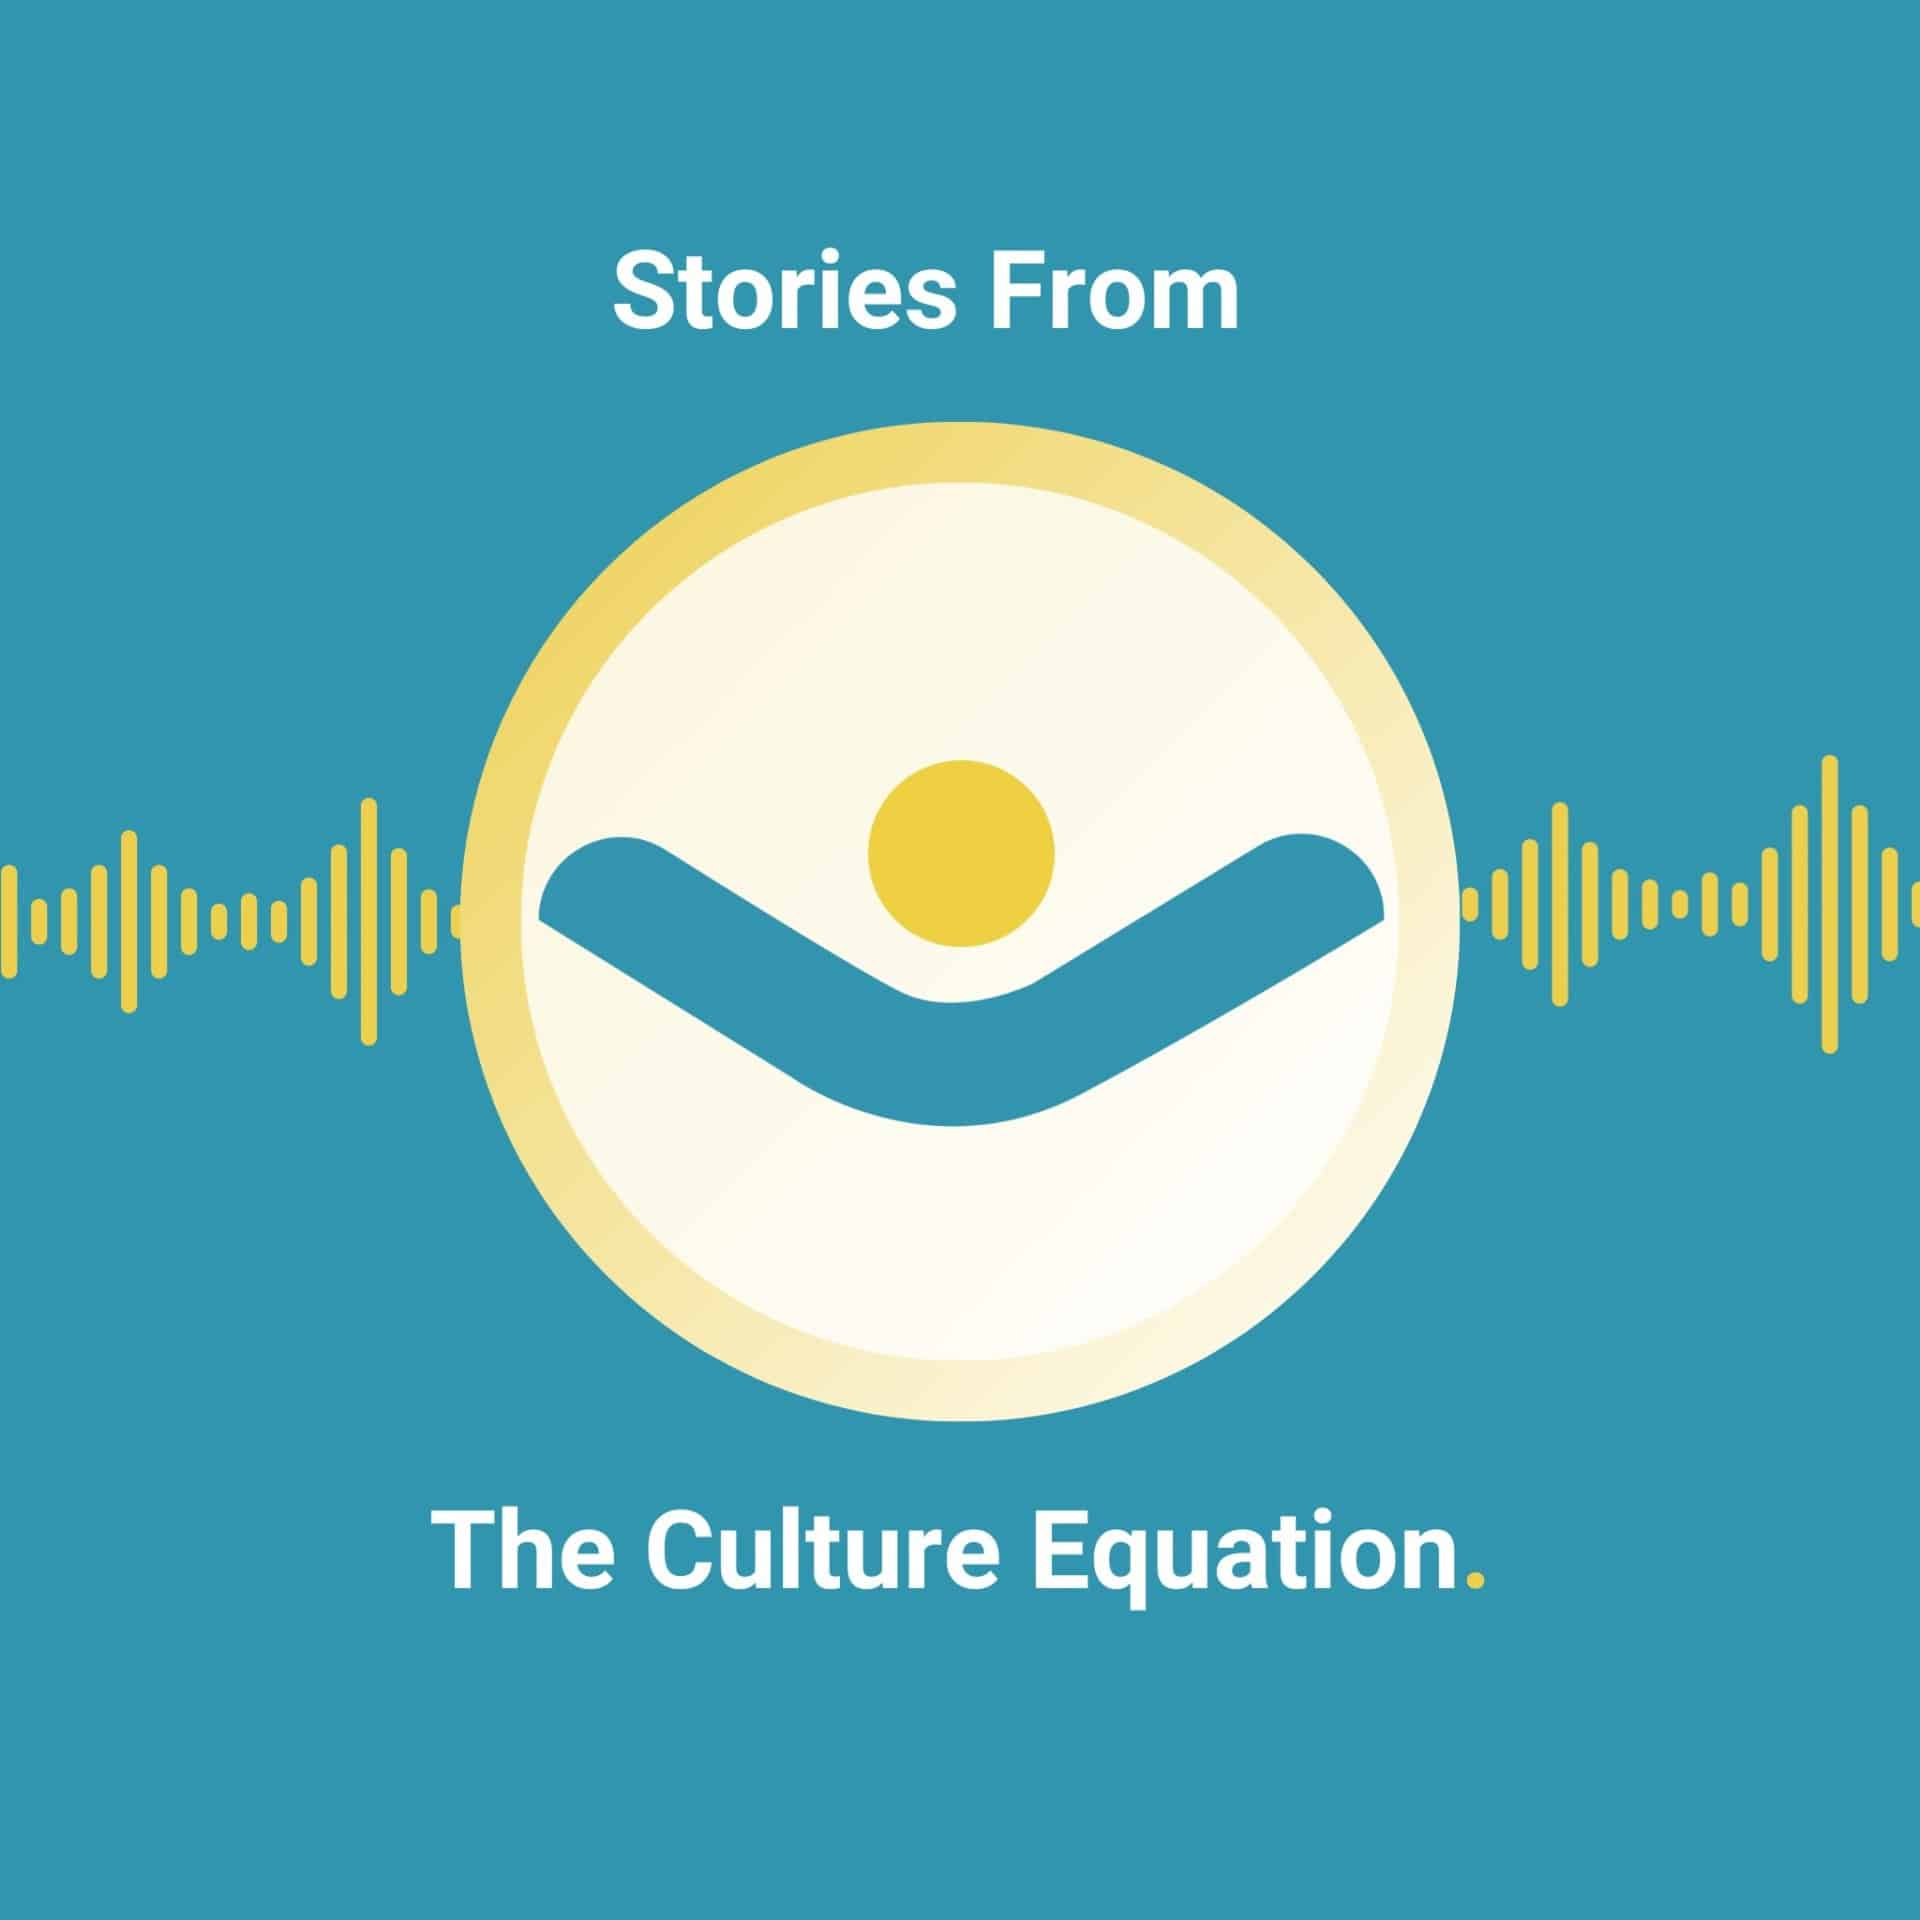 Stories From The Culture Equation